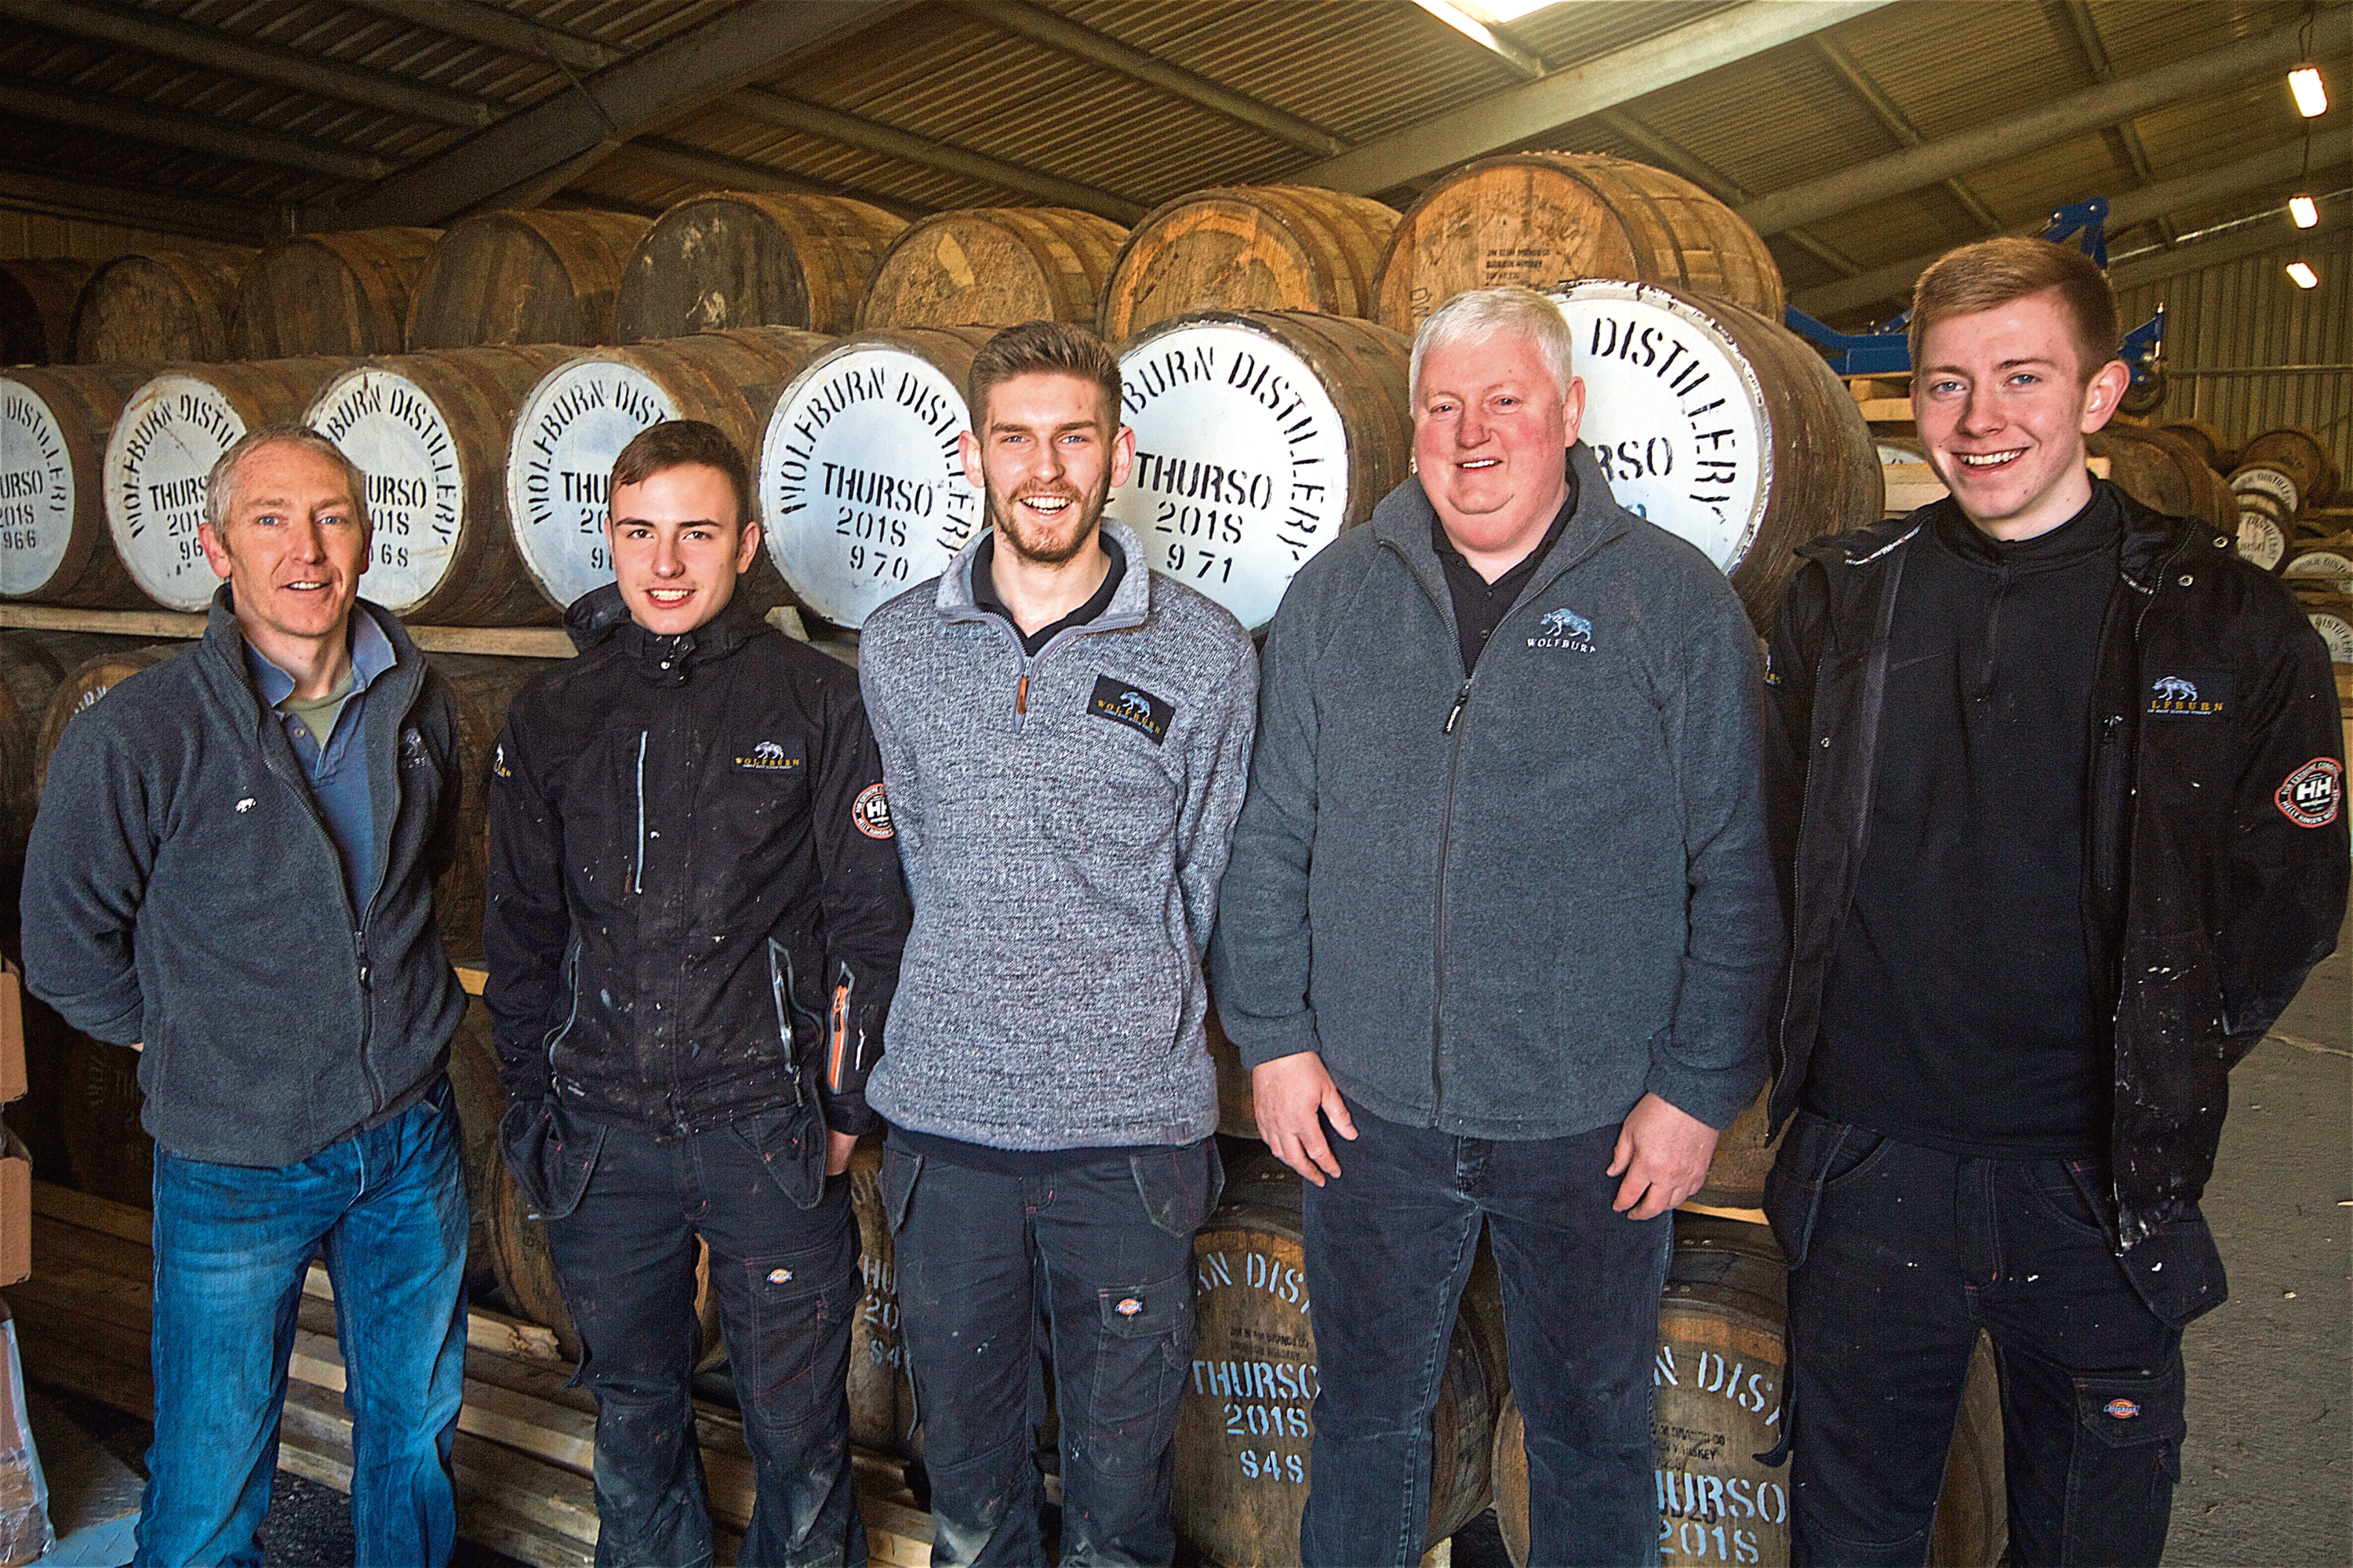 Wolfburn awards and accolades
Wolfburn Distillery production team.  L-R: Iain Kerr (manager), Charlie Fraser, Max Paul, Charlie Ross, Innes Mackintosh.